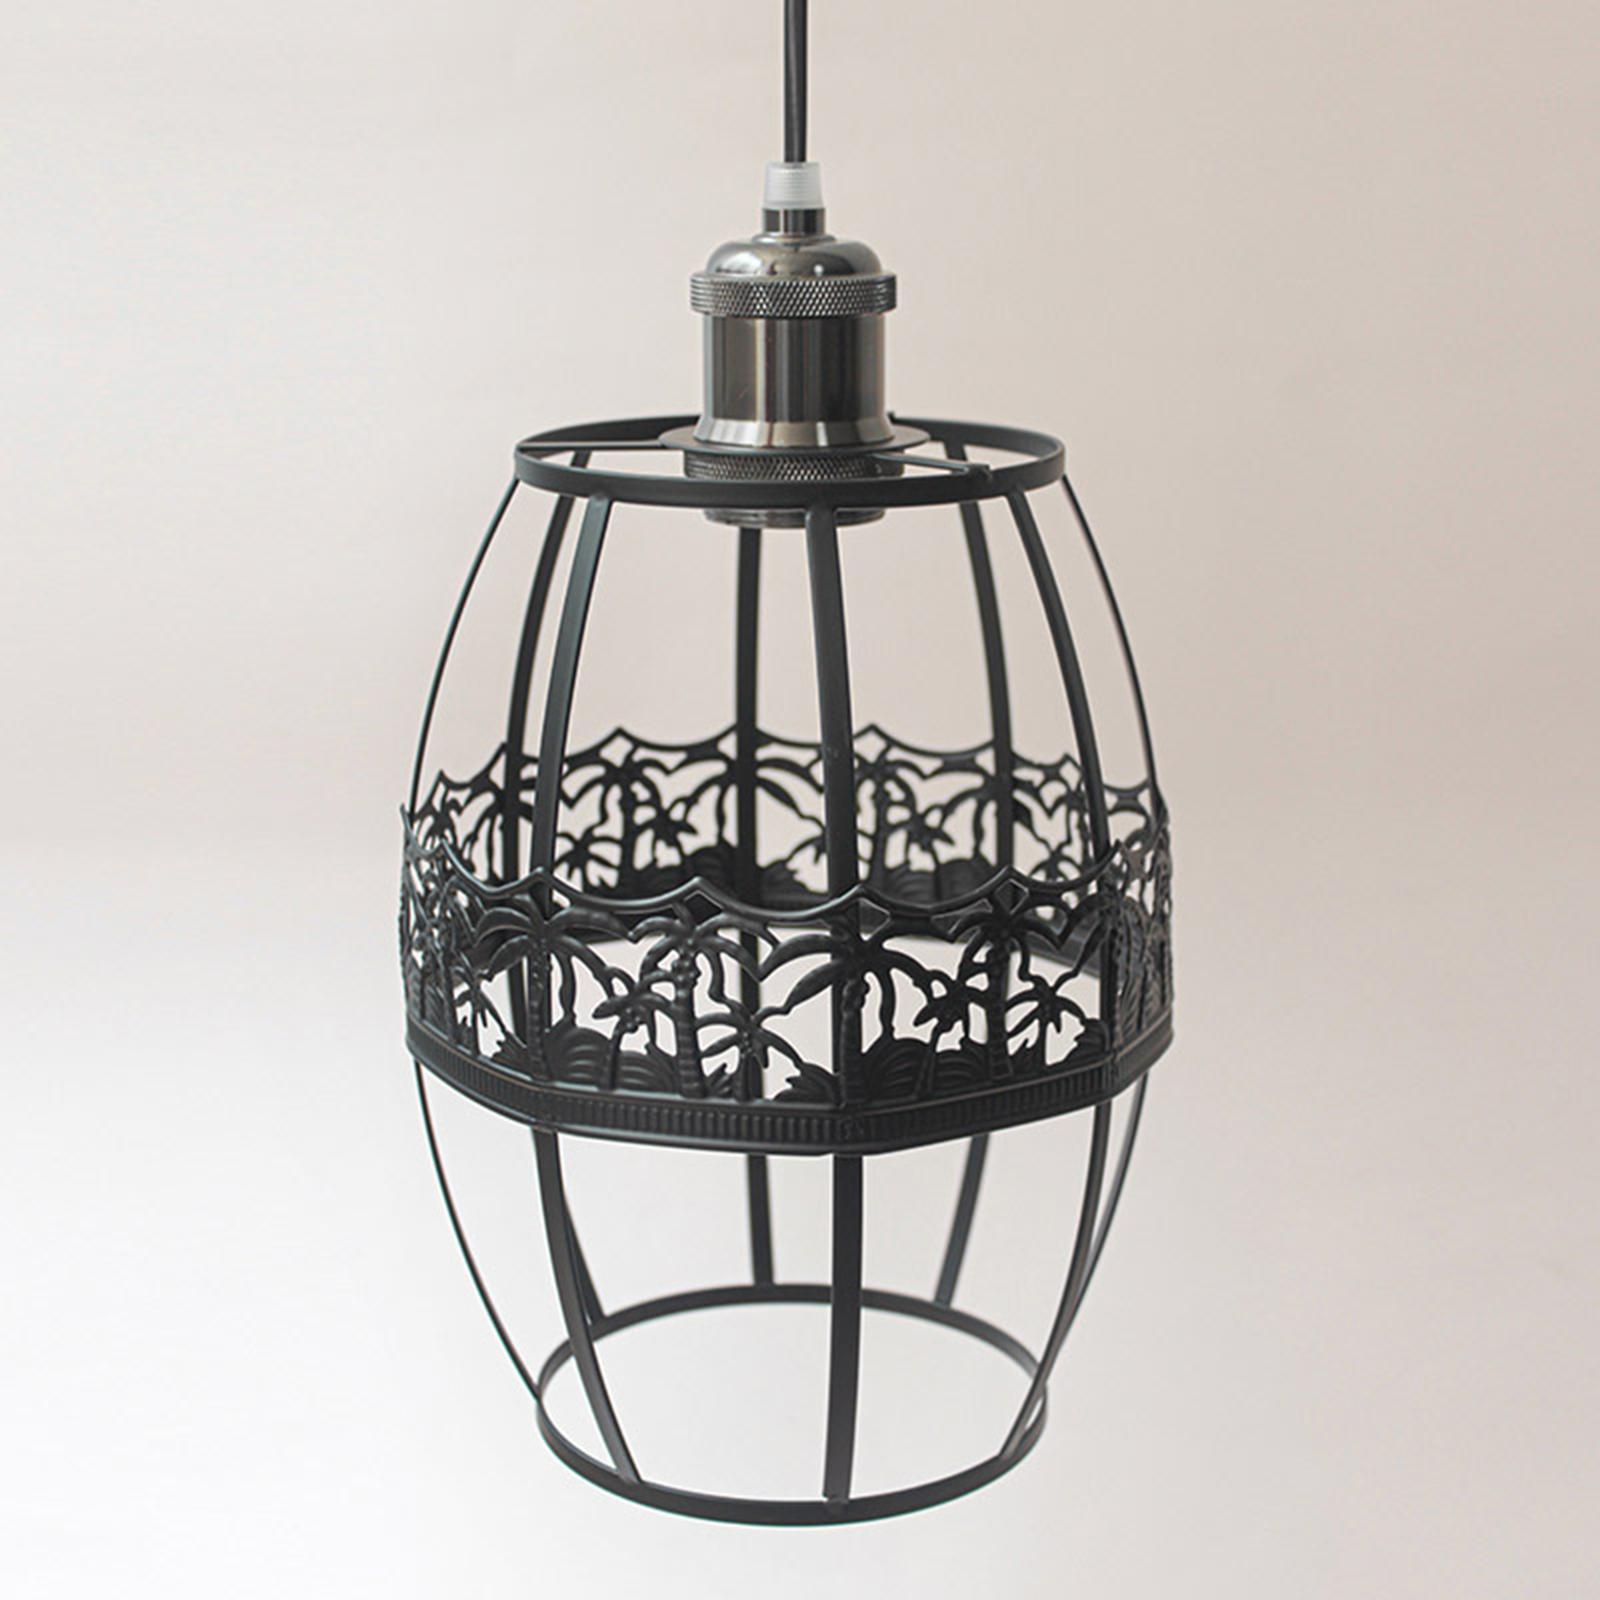 Chandelier Ceiling Lamp Shades Retro Design Light Shade Wire Cage Lamp Shade